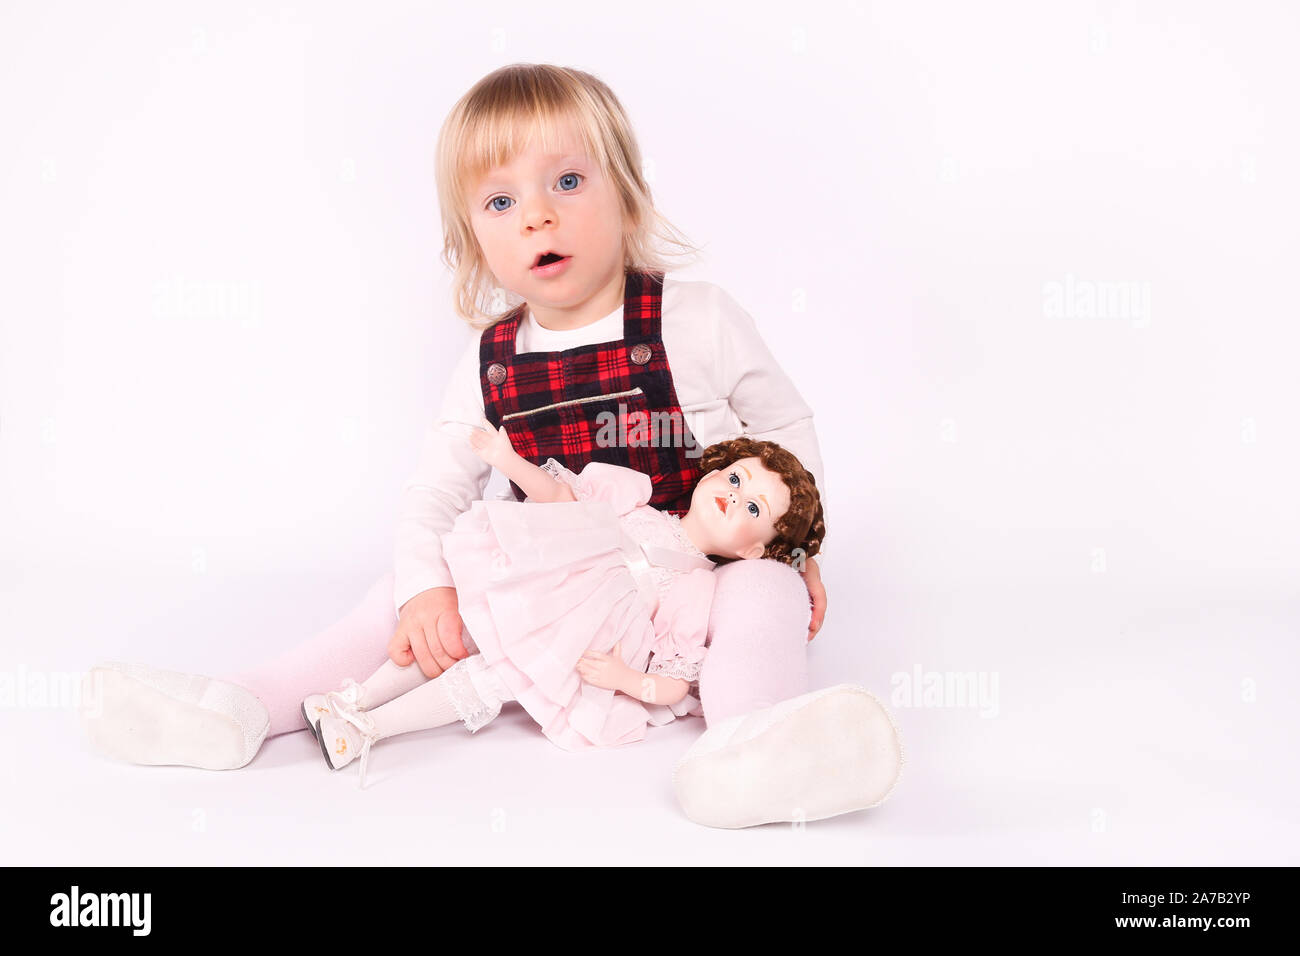 Little blonde toddler girl with big Blue Eyes in red dress play with old doll. Sitting on the floor, white background. Portrait, close-up isolated Stock Photo